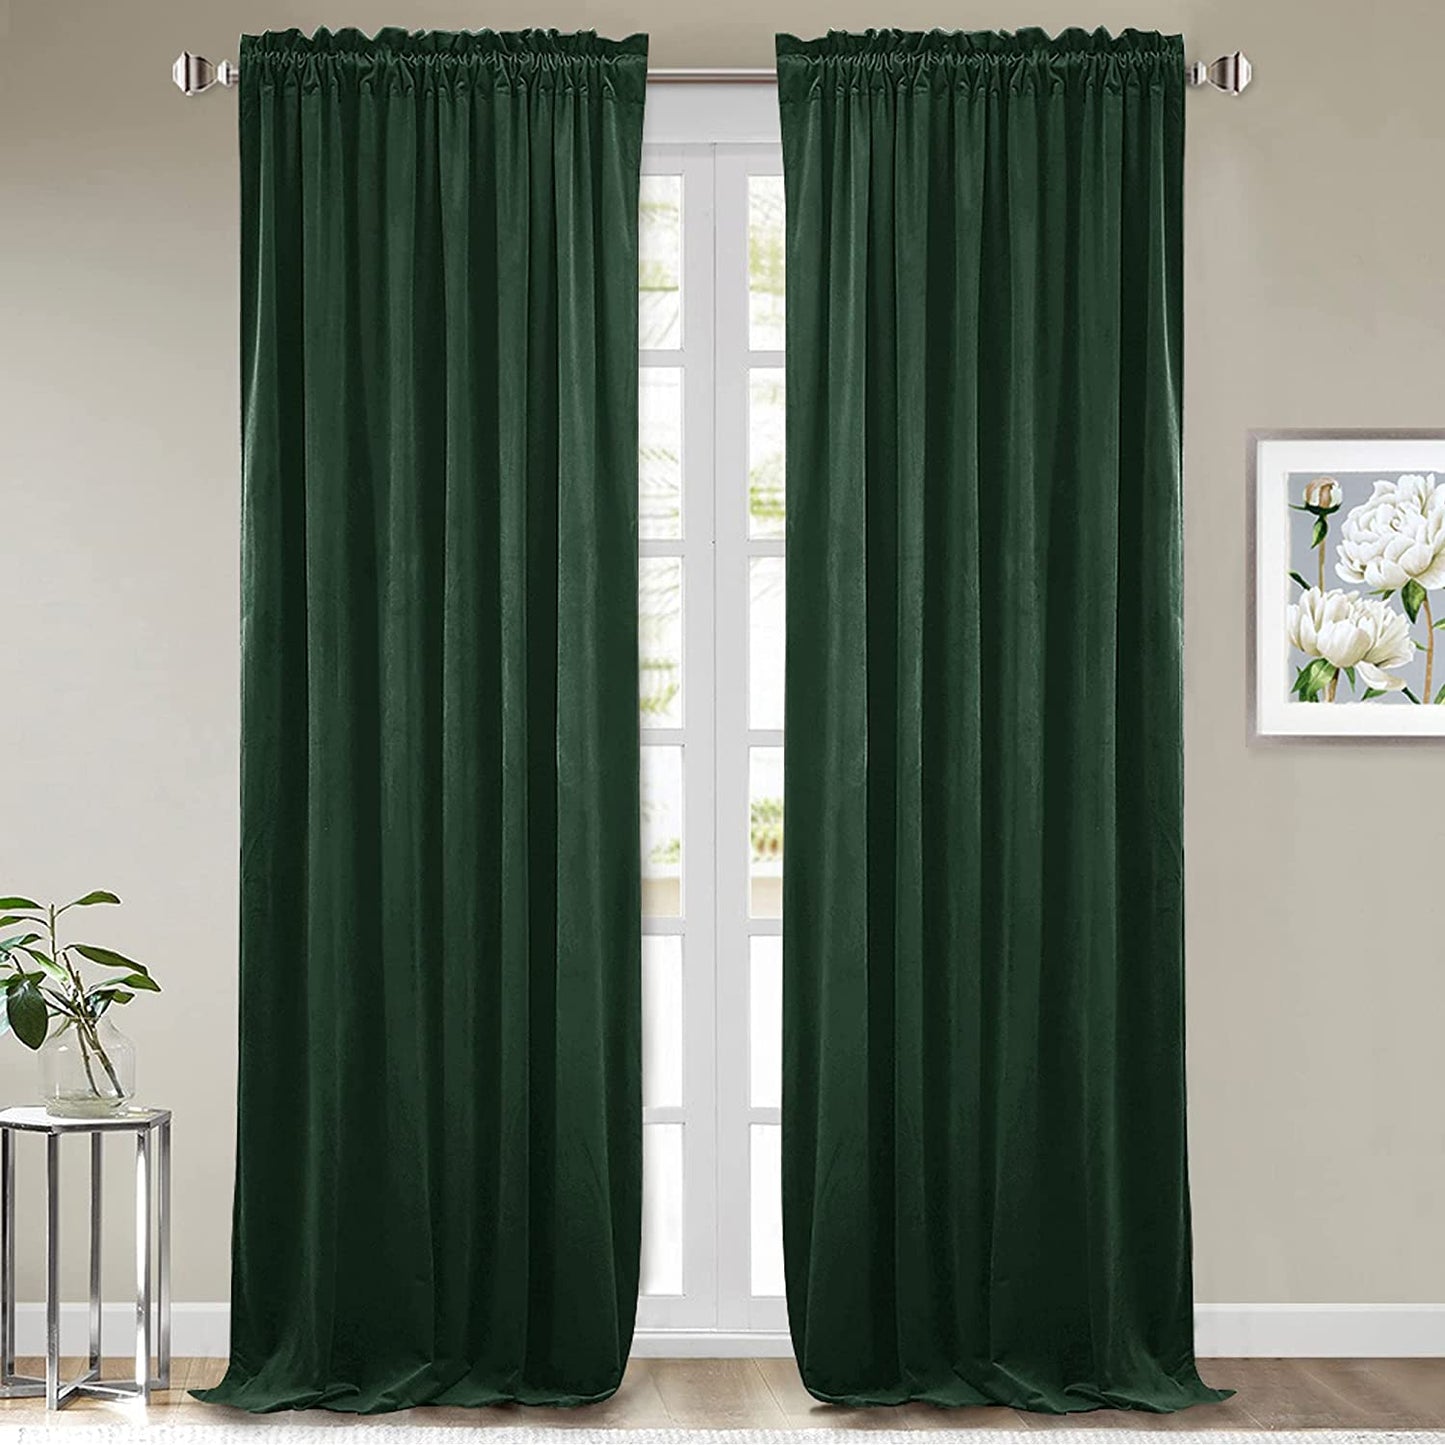 Stangh Theater Red Velvet Curtains - Super Soft Velvet Blackout Insulated Curtain Panels 84 Inches Length for Living Room Holiday Decorative Drapes for Master Bedroom, W52 X L84, 2 Panels  StangH Dark Green W62" X L84" 